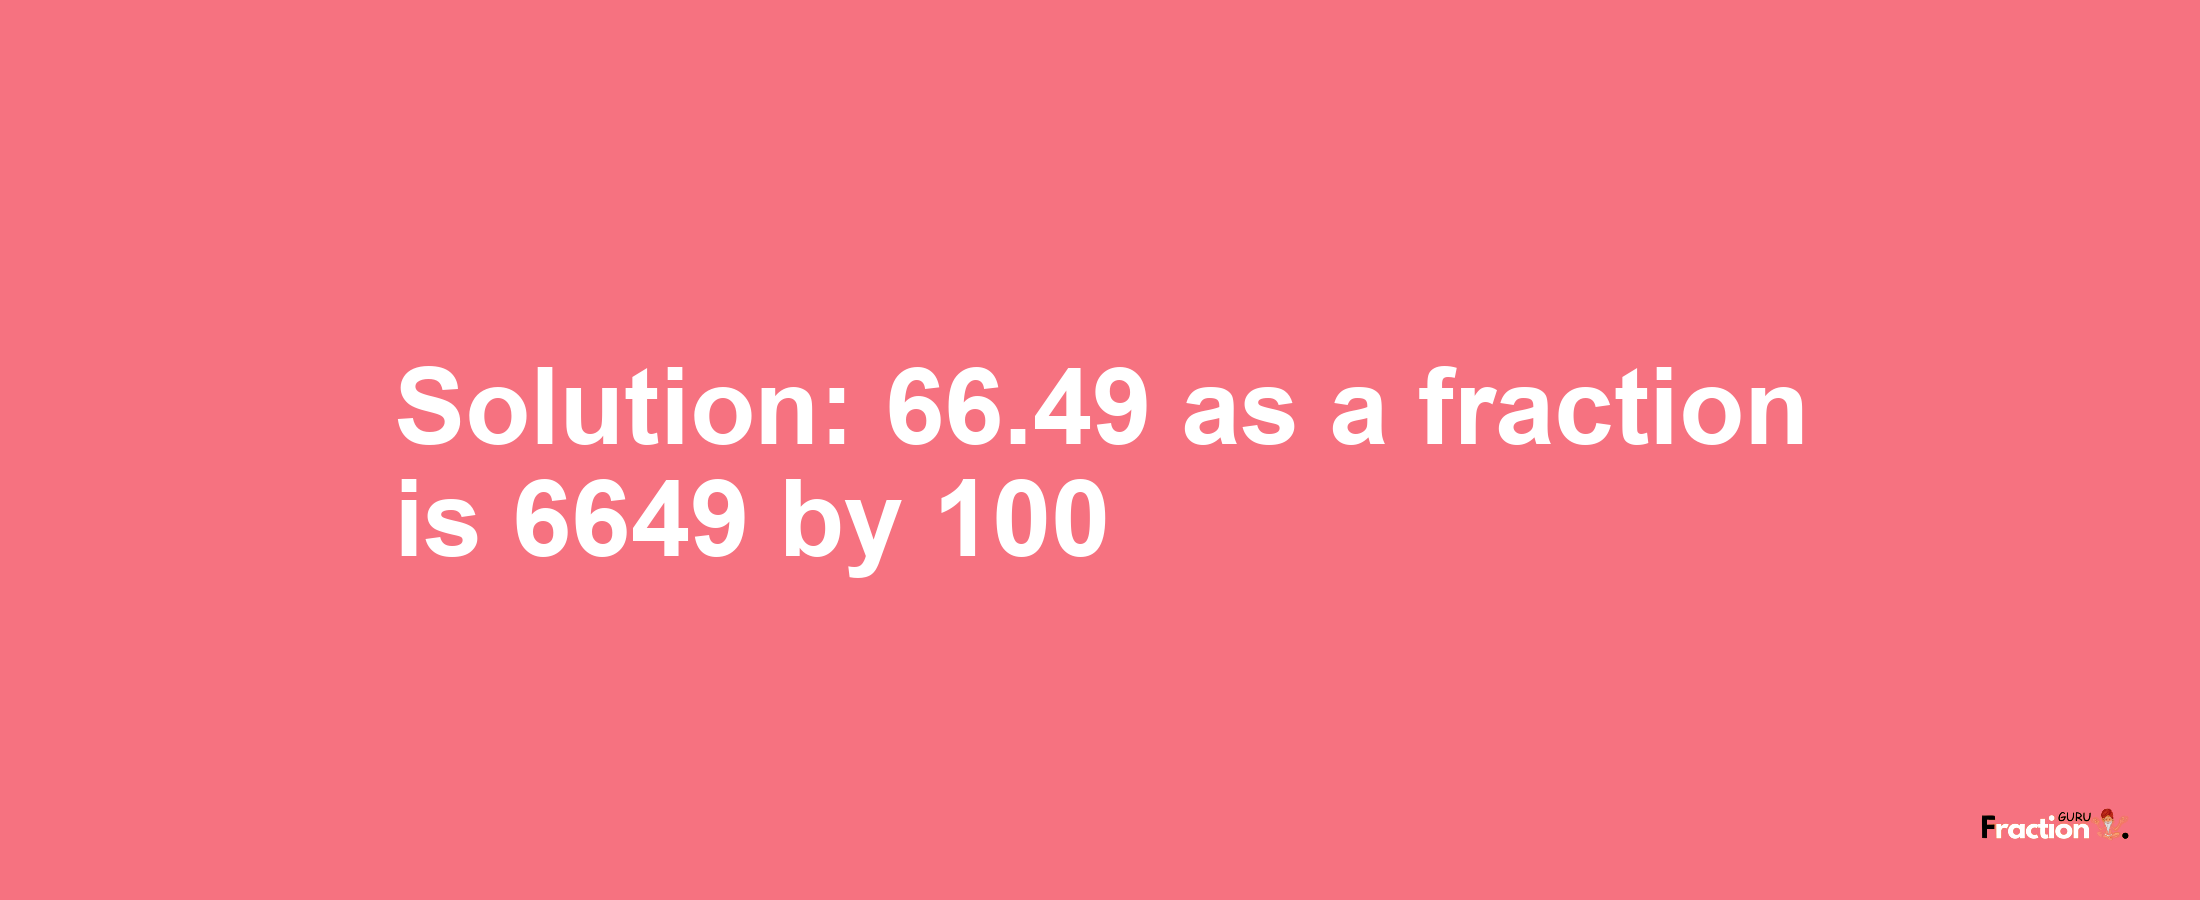 Solution:66.49 as a fraction is 6649/100